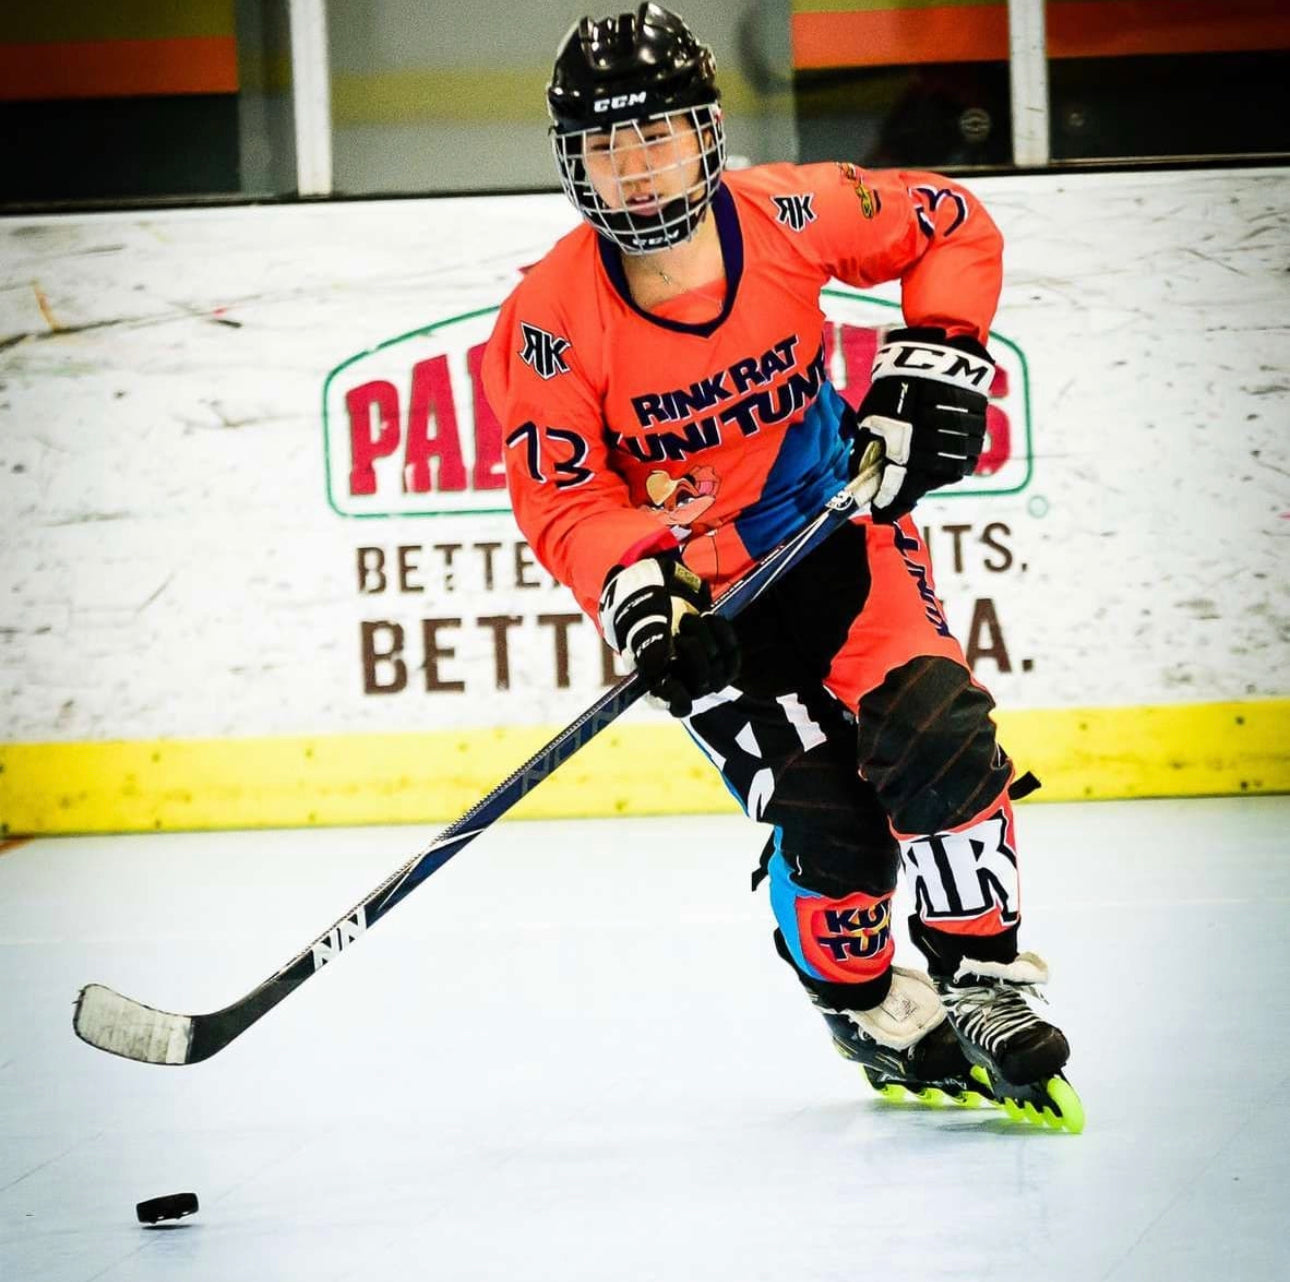 Roller Hockey for an Ice Hockey Player